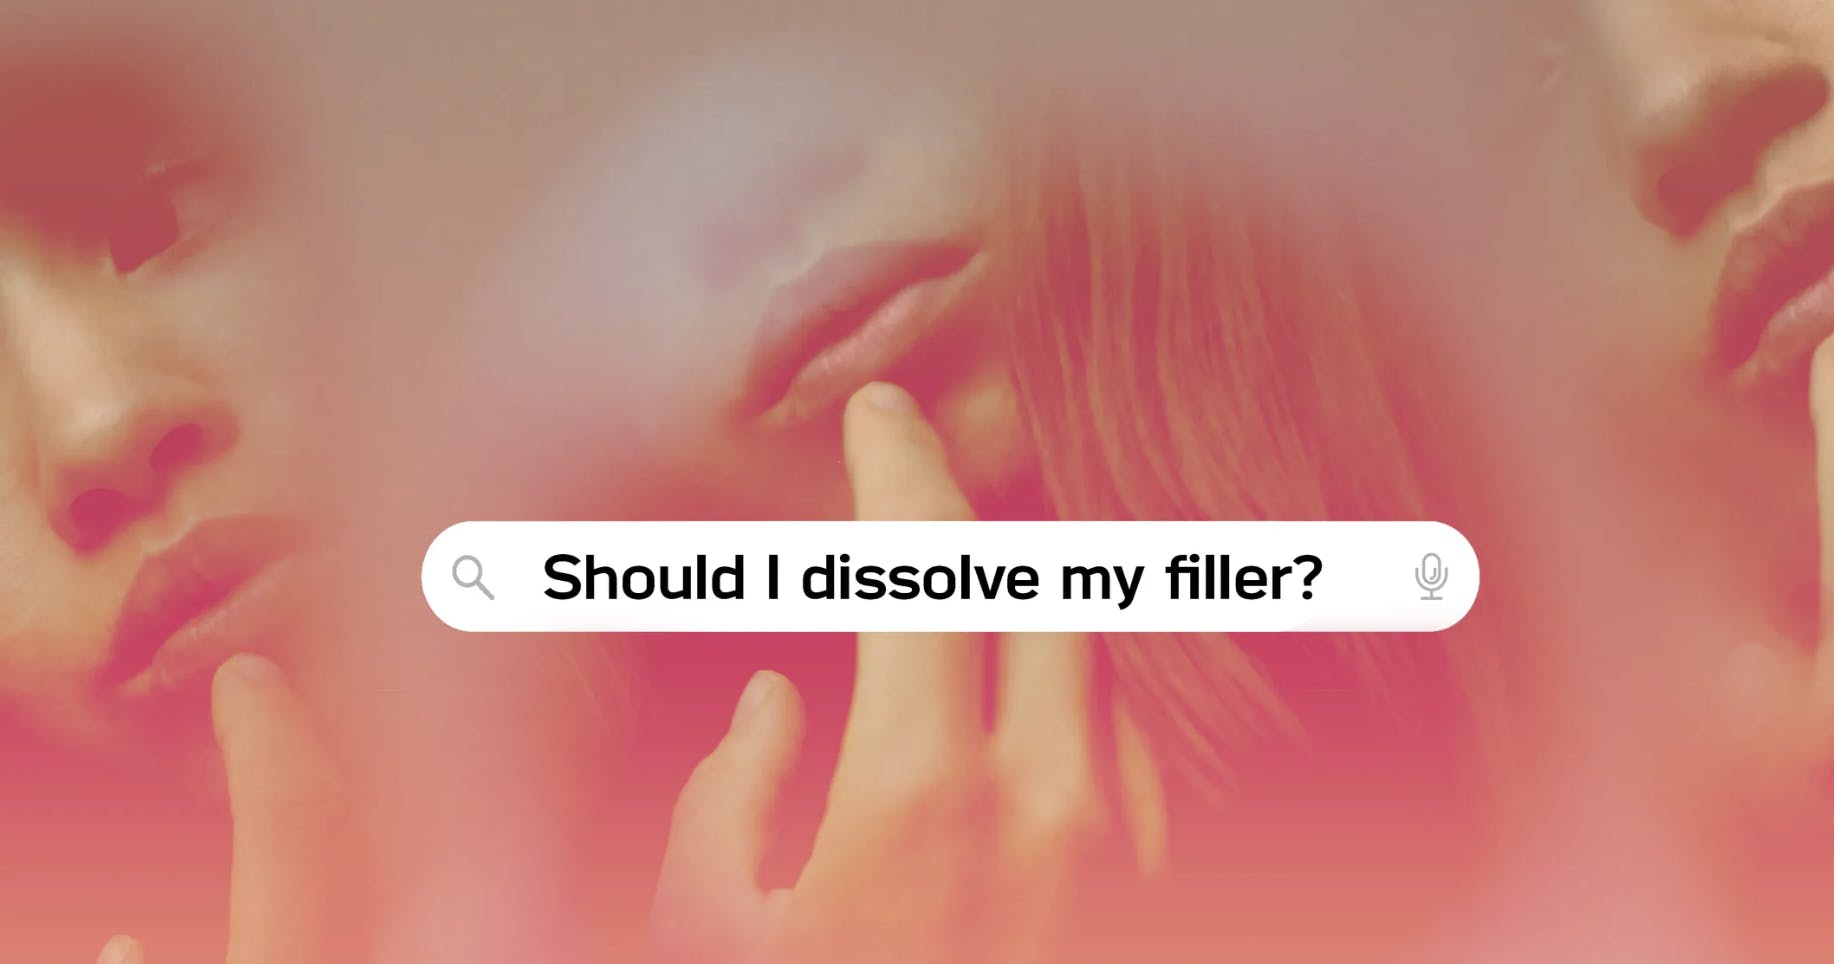 This Is What It’s Really Like to Dissolve Your Filler | Allure